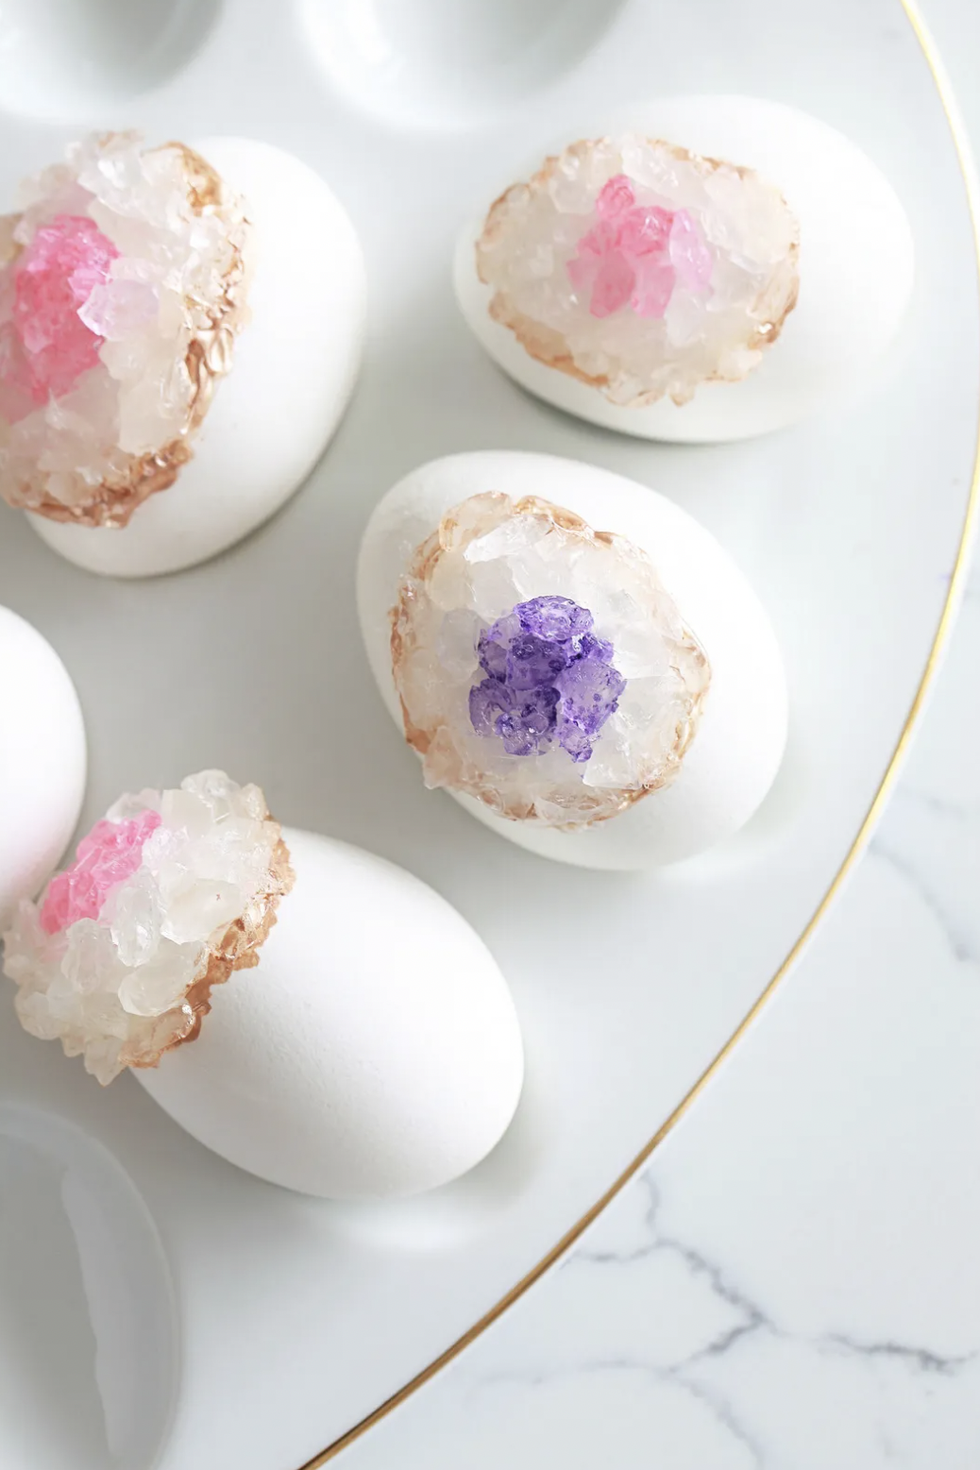 15 Gorgeous Easter Craft Ideas for Adults That You'll Love Making